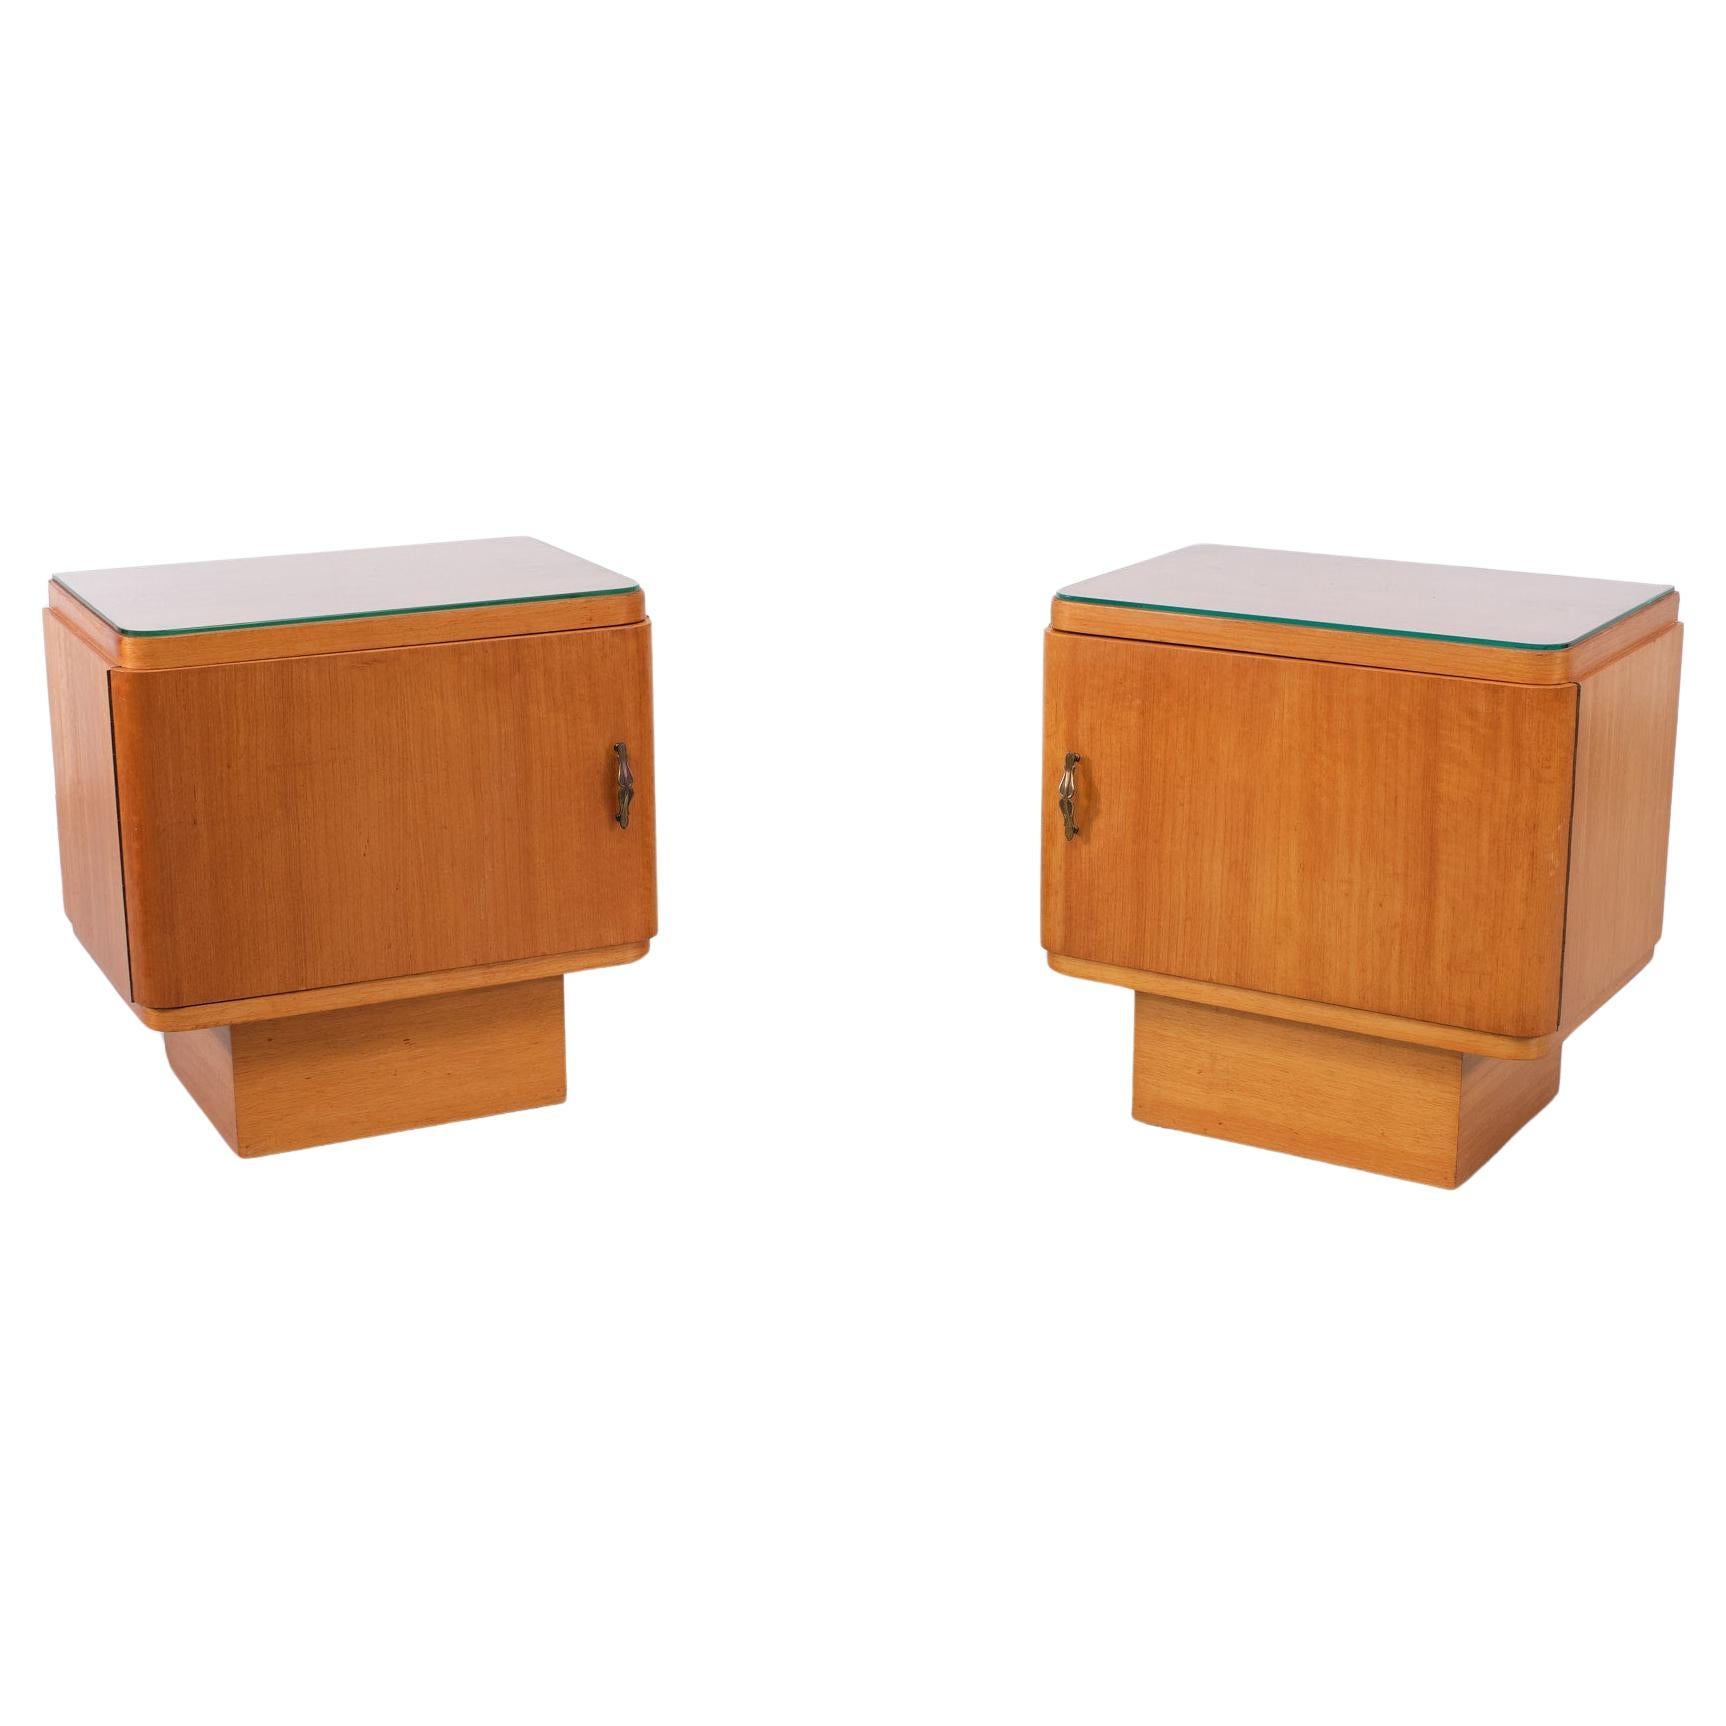 Very nice set of Art Deco Night Stands, beautiful curved Satinwood .
1925s Holland .Glass tops . Good condition . 

Please don't hesitate to reach out for alternative shipping 